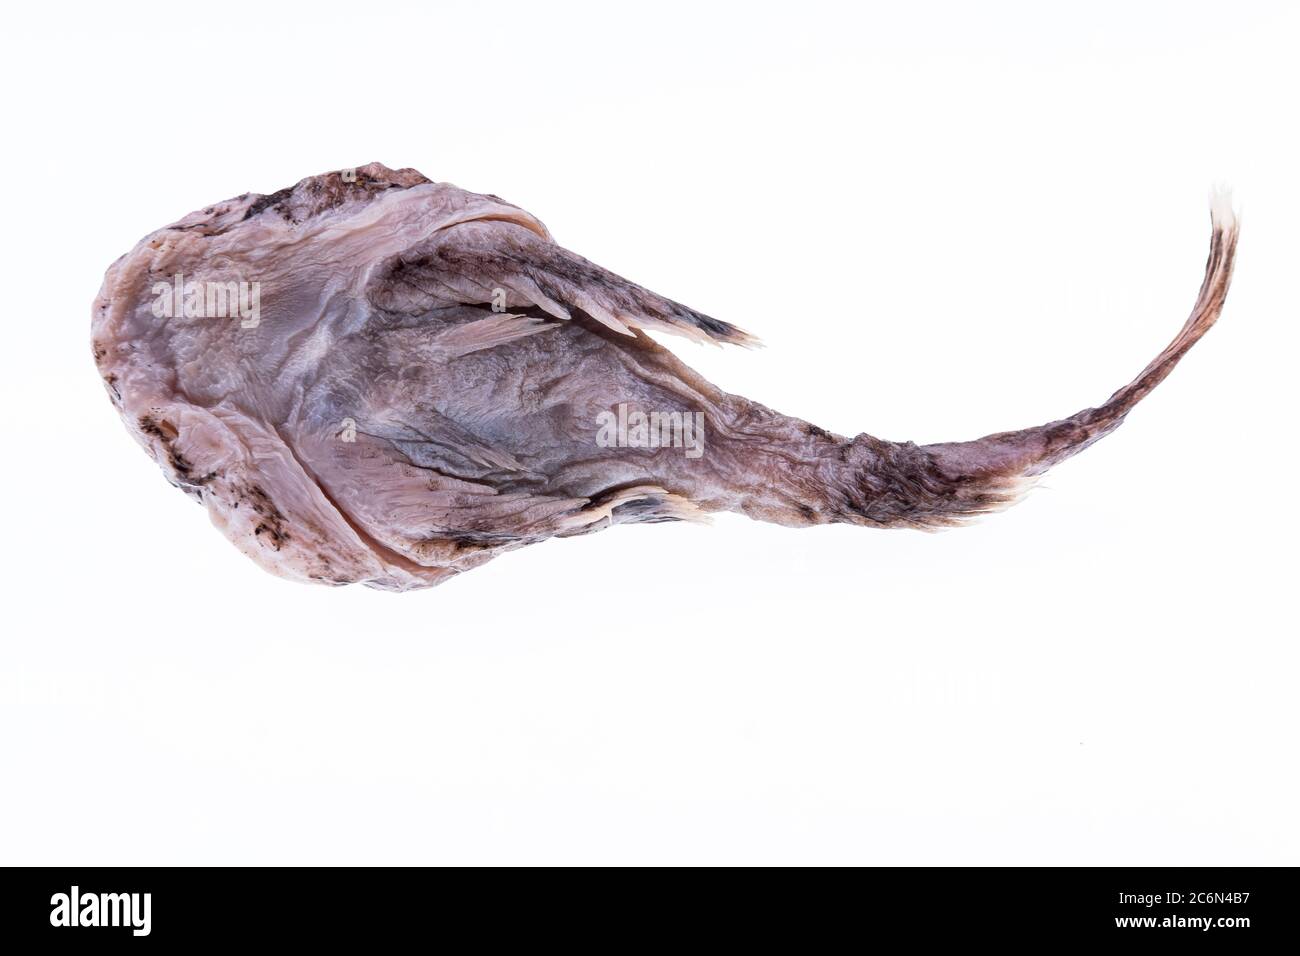 (don't have the corresponding cataloguation of this fish, will update) from the collection of the Spanish Institute of Oceanography of Malaga, Spain. Stock Photo